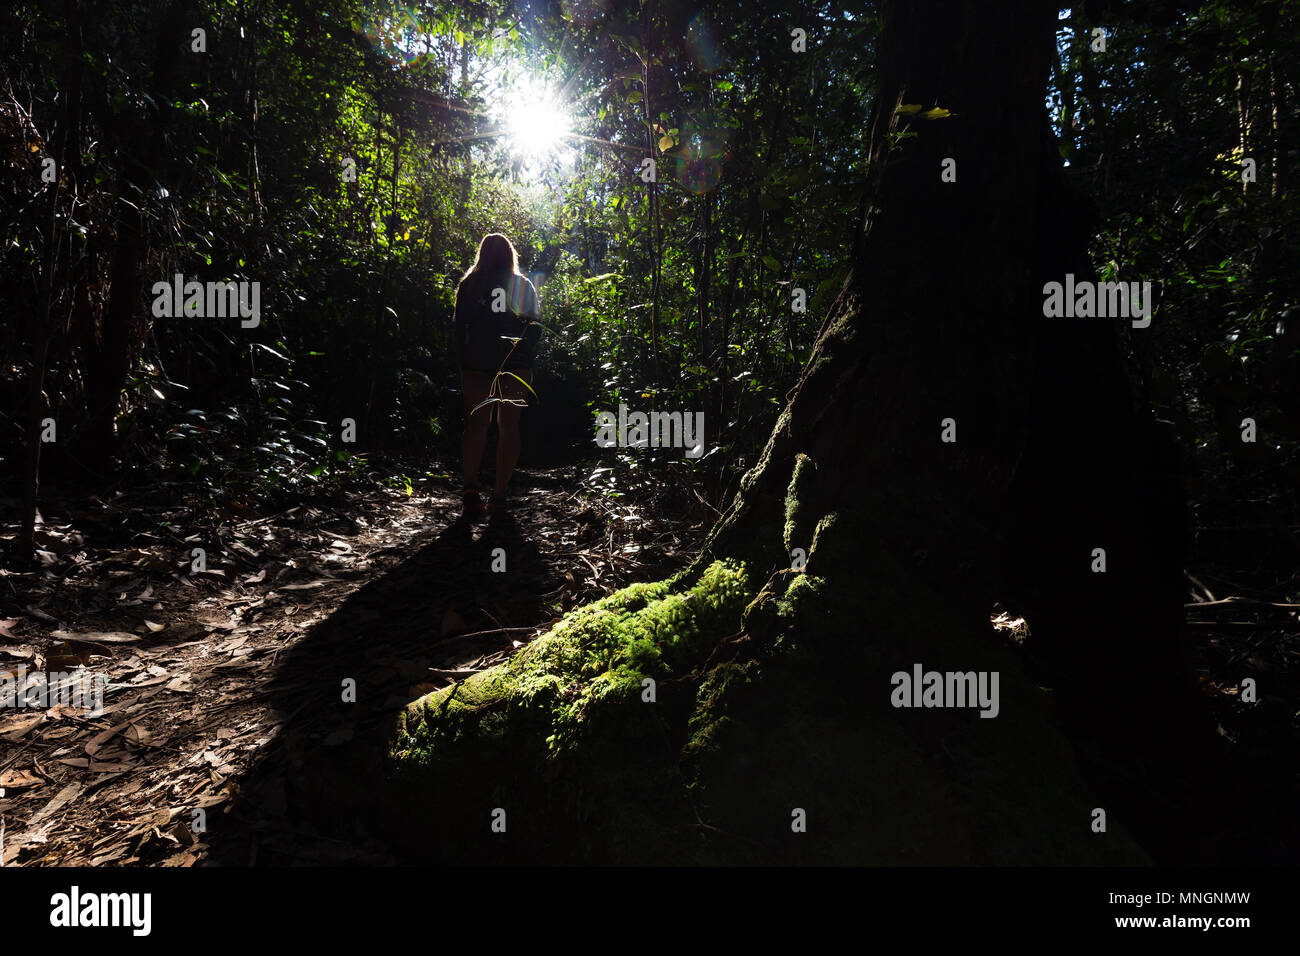 Girl walking through a back lit, overgrown ethereal rain forest in the Australian Blue Mountains. Stock Photo